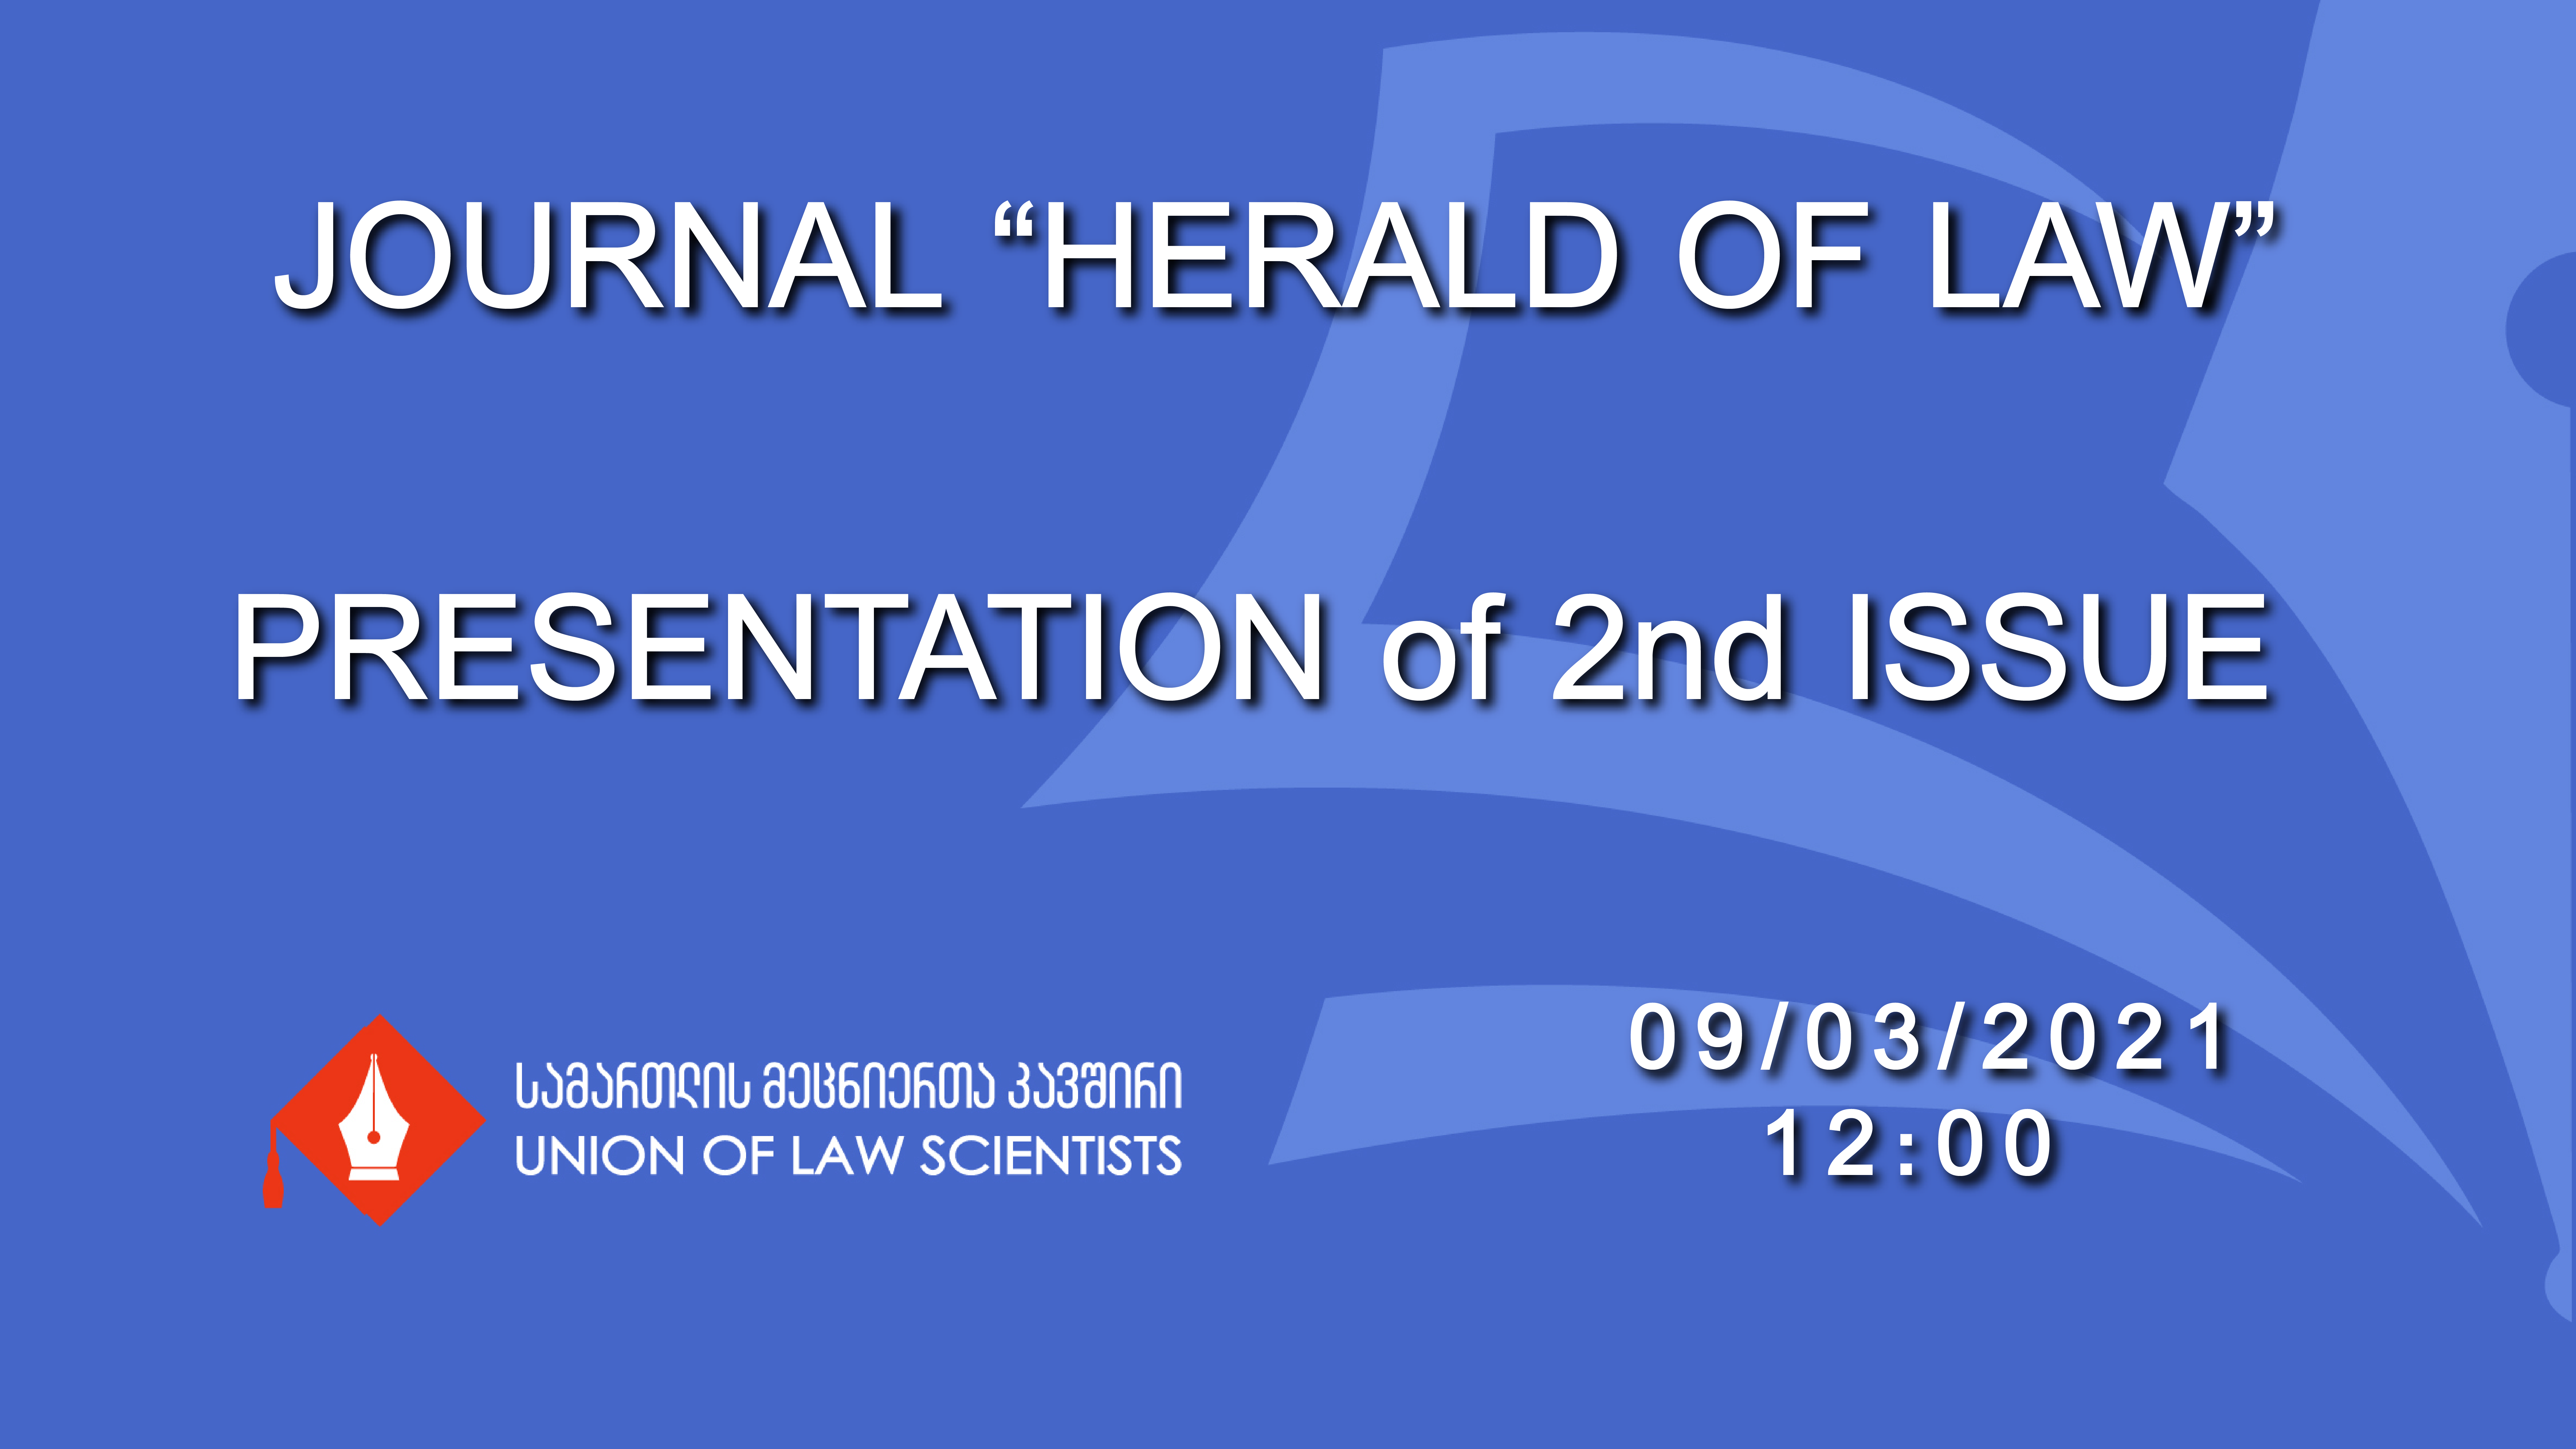 You are invited at the event introducing the second issue of the international scientific journal “Herald of Law”.